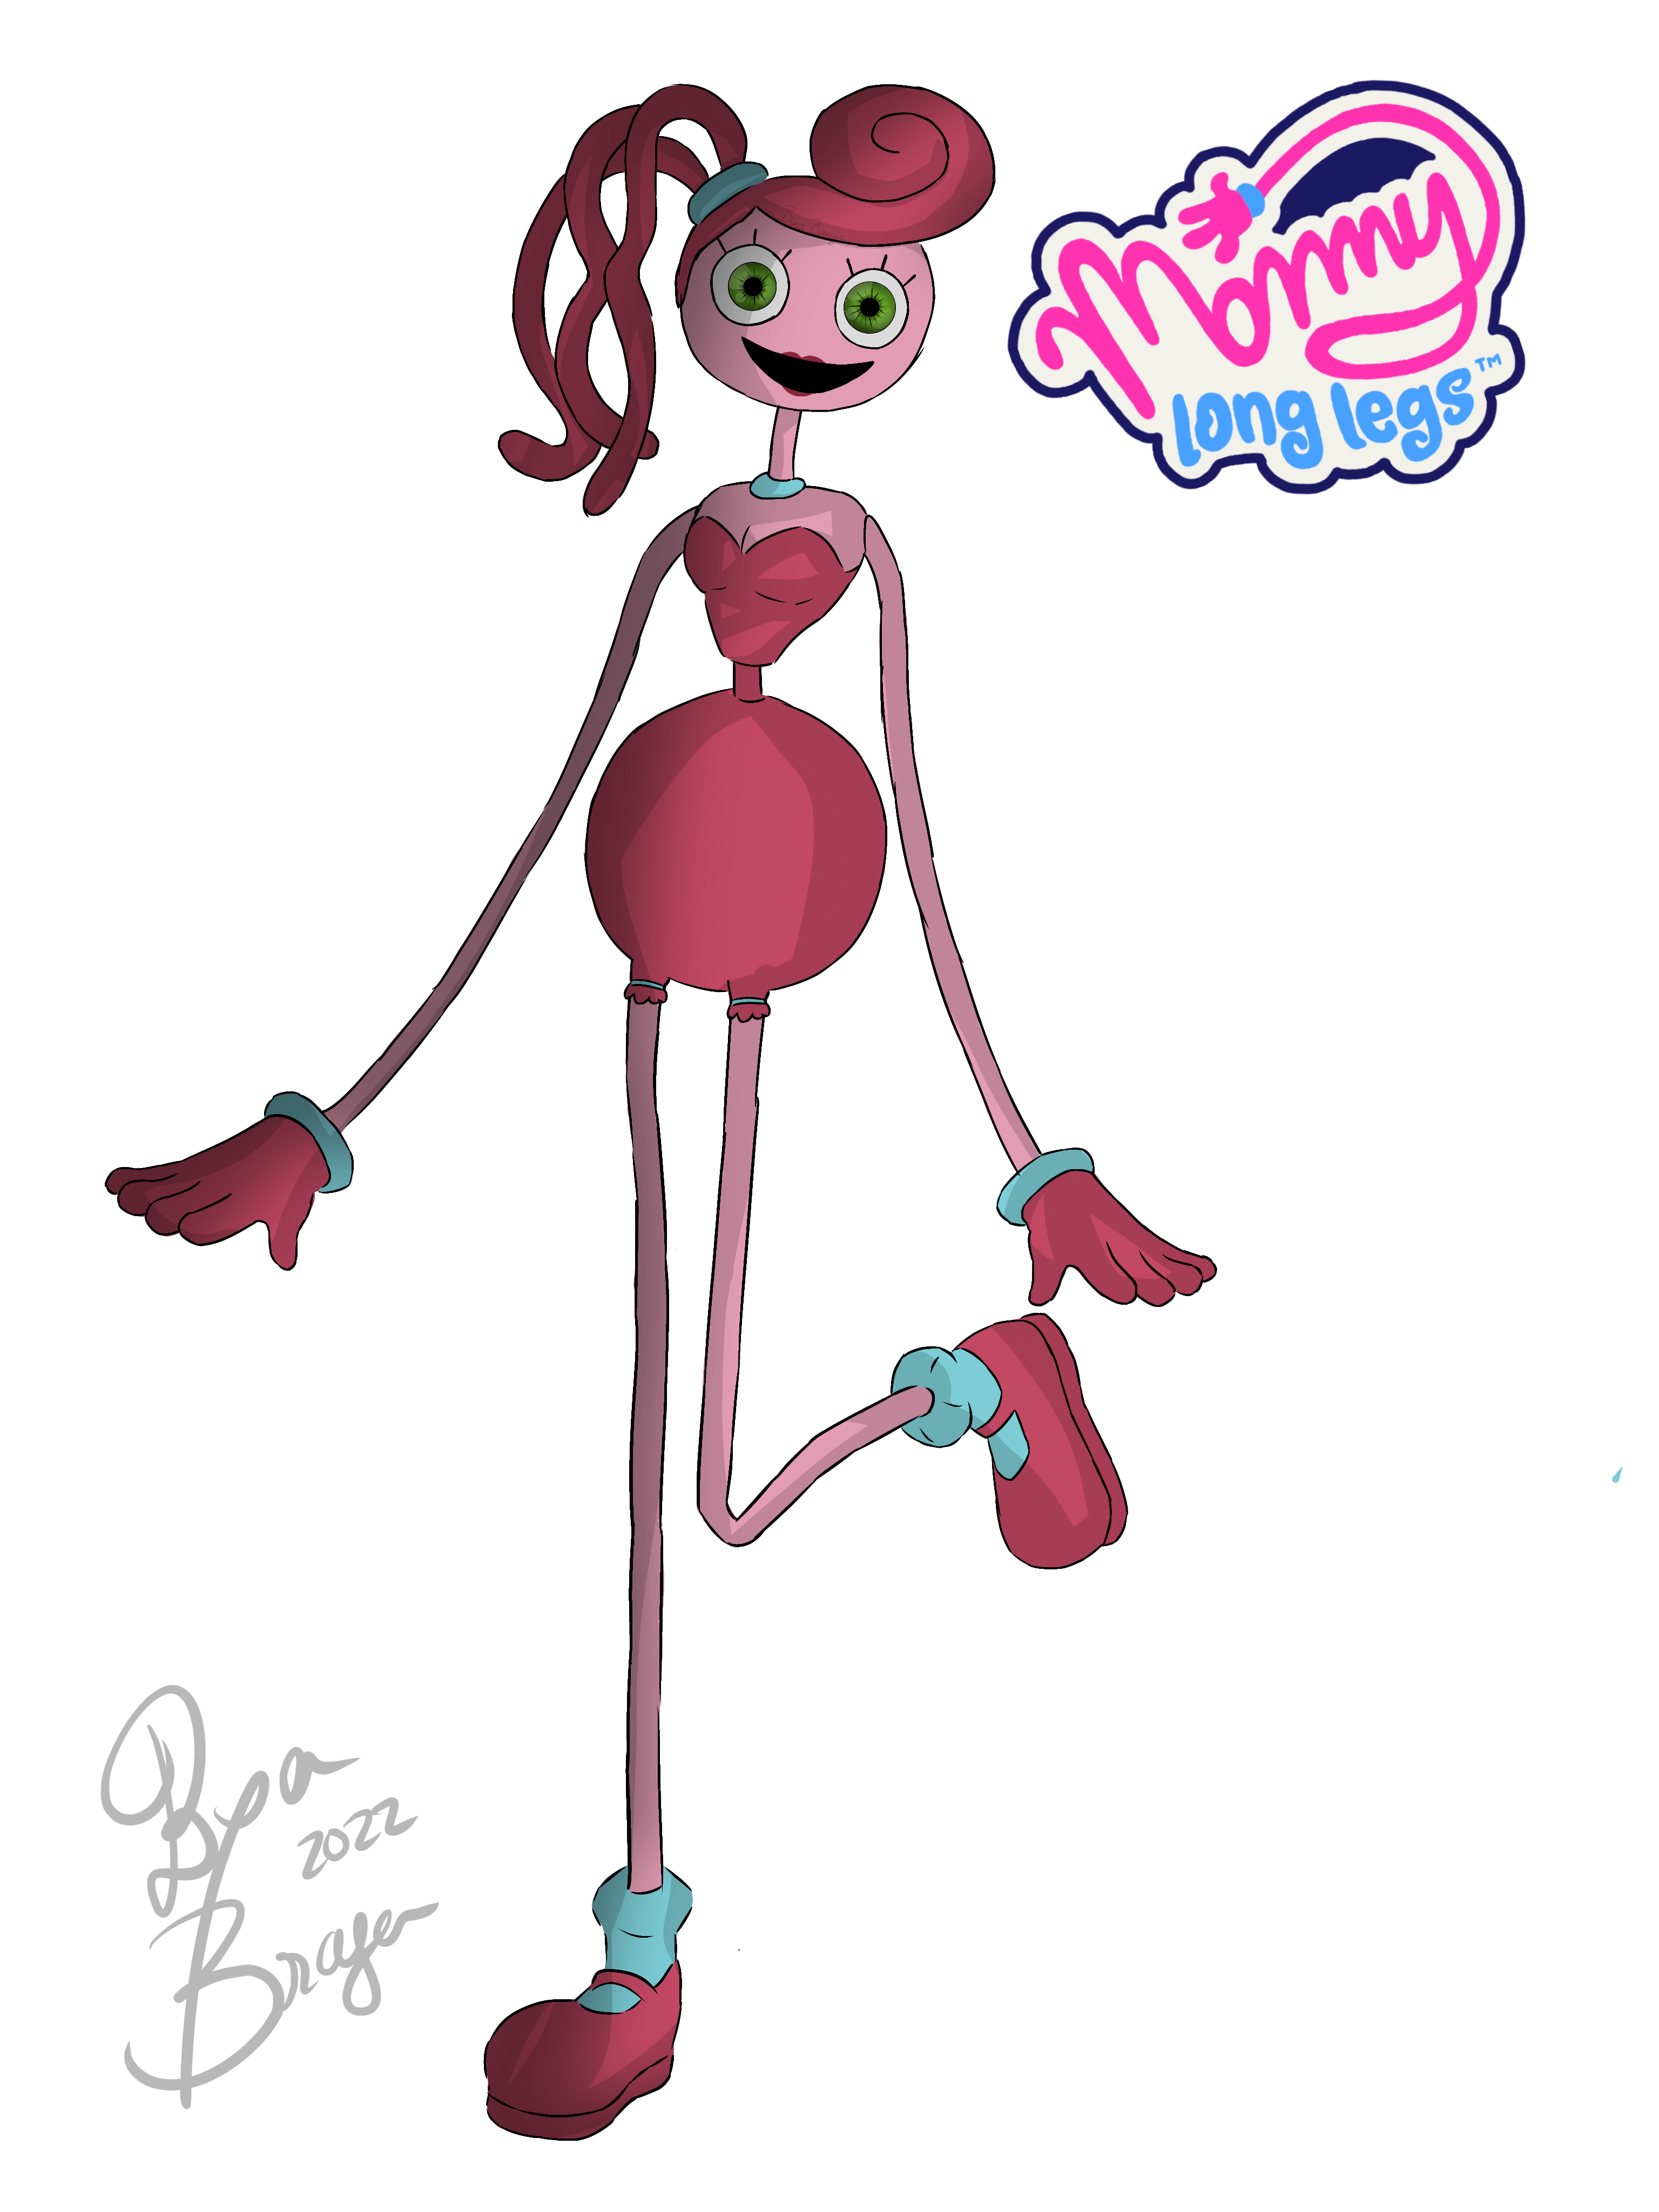 Drawing Mommy Long Legs in Different Art Styles : r/PoppyPlaytime